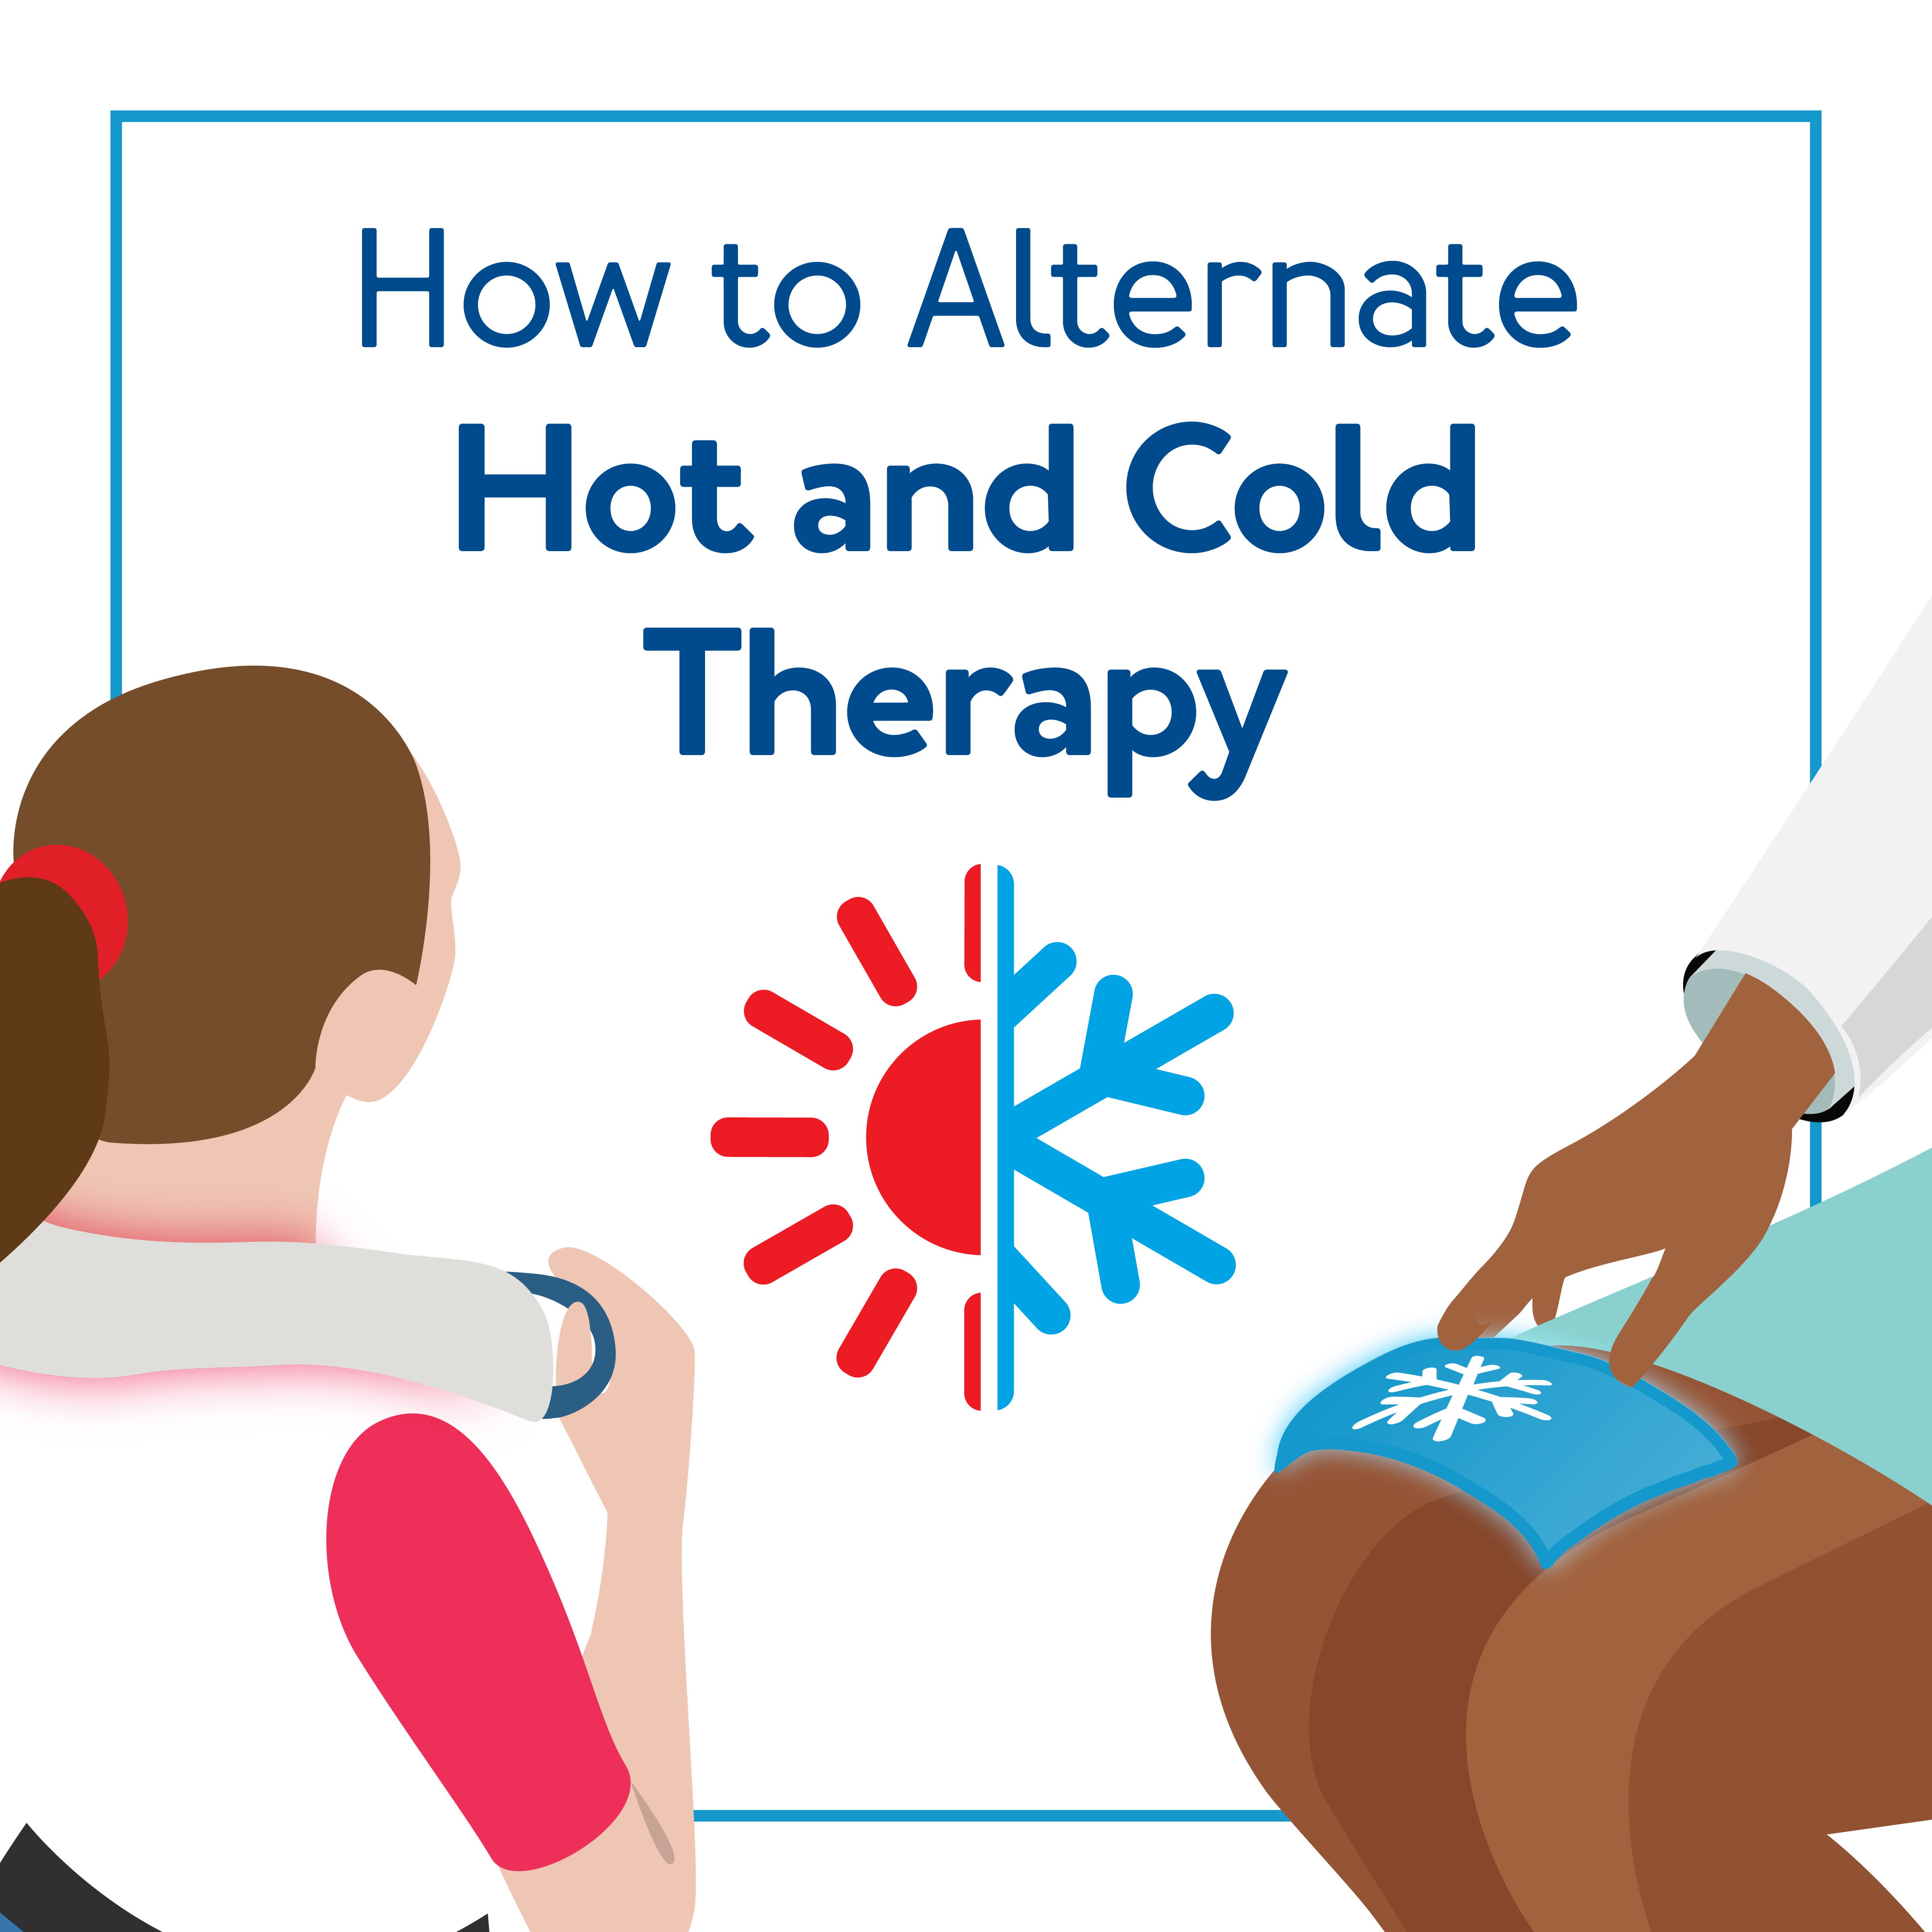 How to Alternate Hot and Cold Therapy